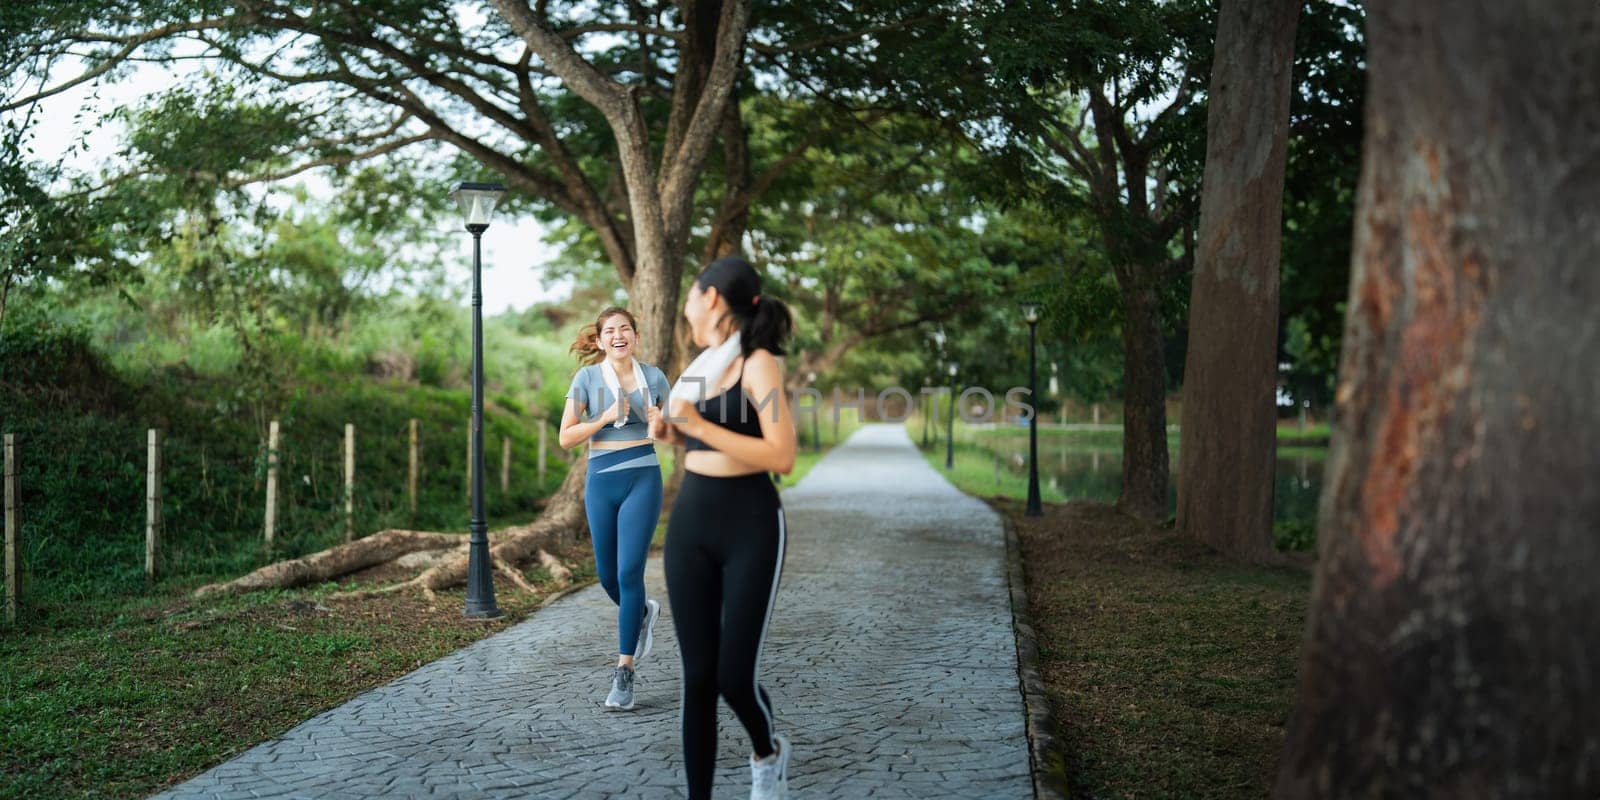 Healthy and active lifestyle, sport concept. Attractive ecstatic young sportswoman, smiling joyfully as jogging, sprinter run in park.